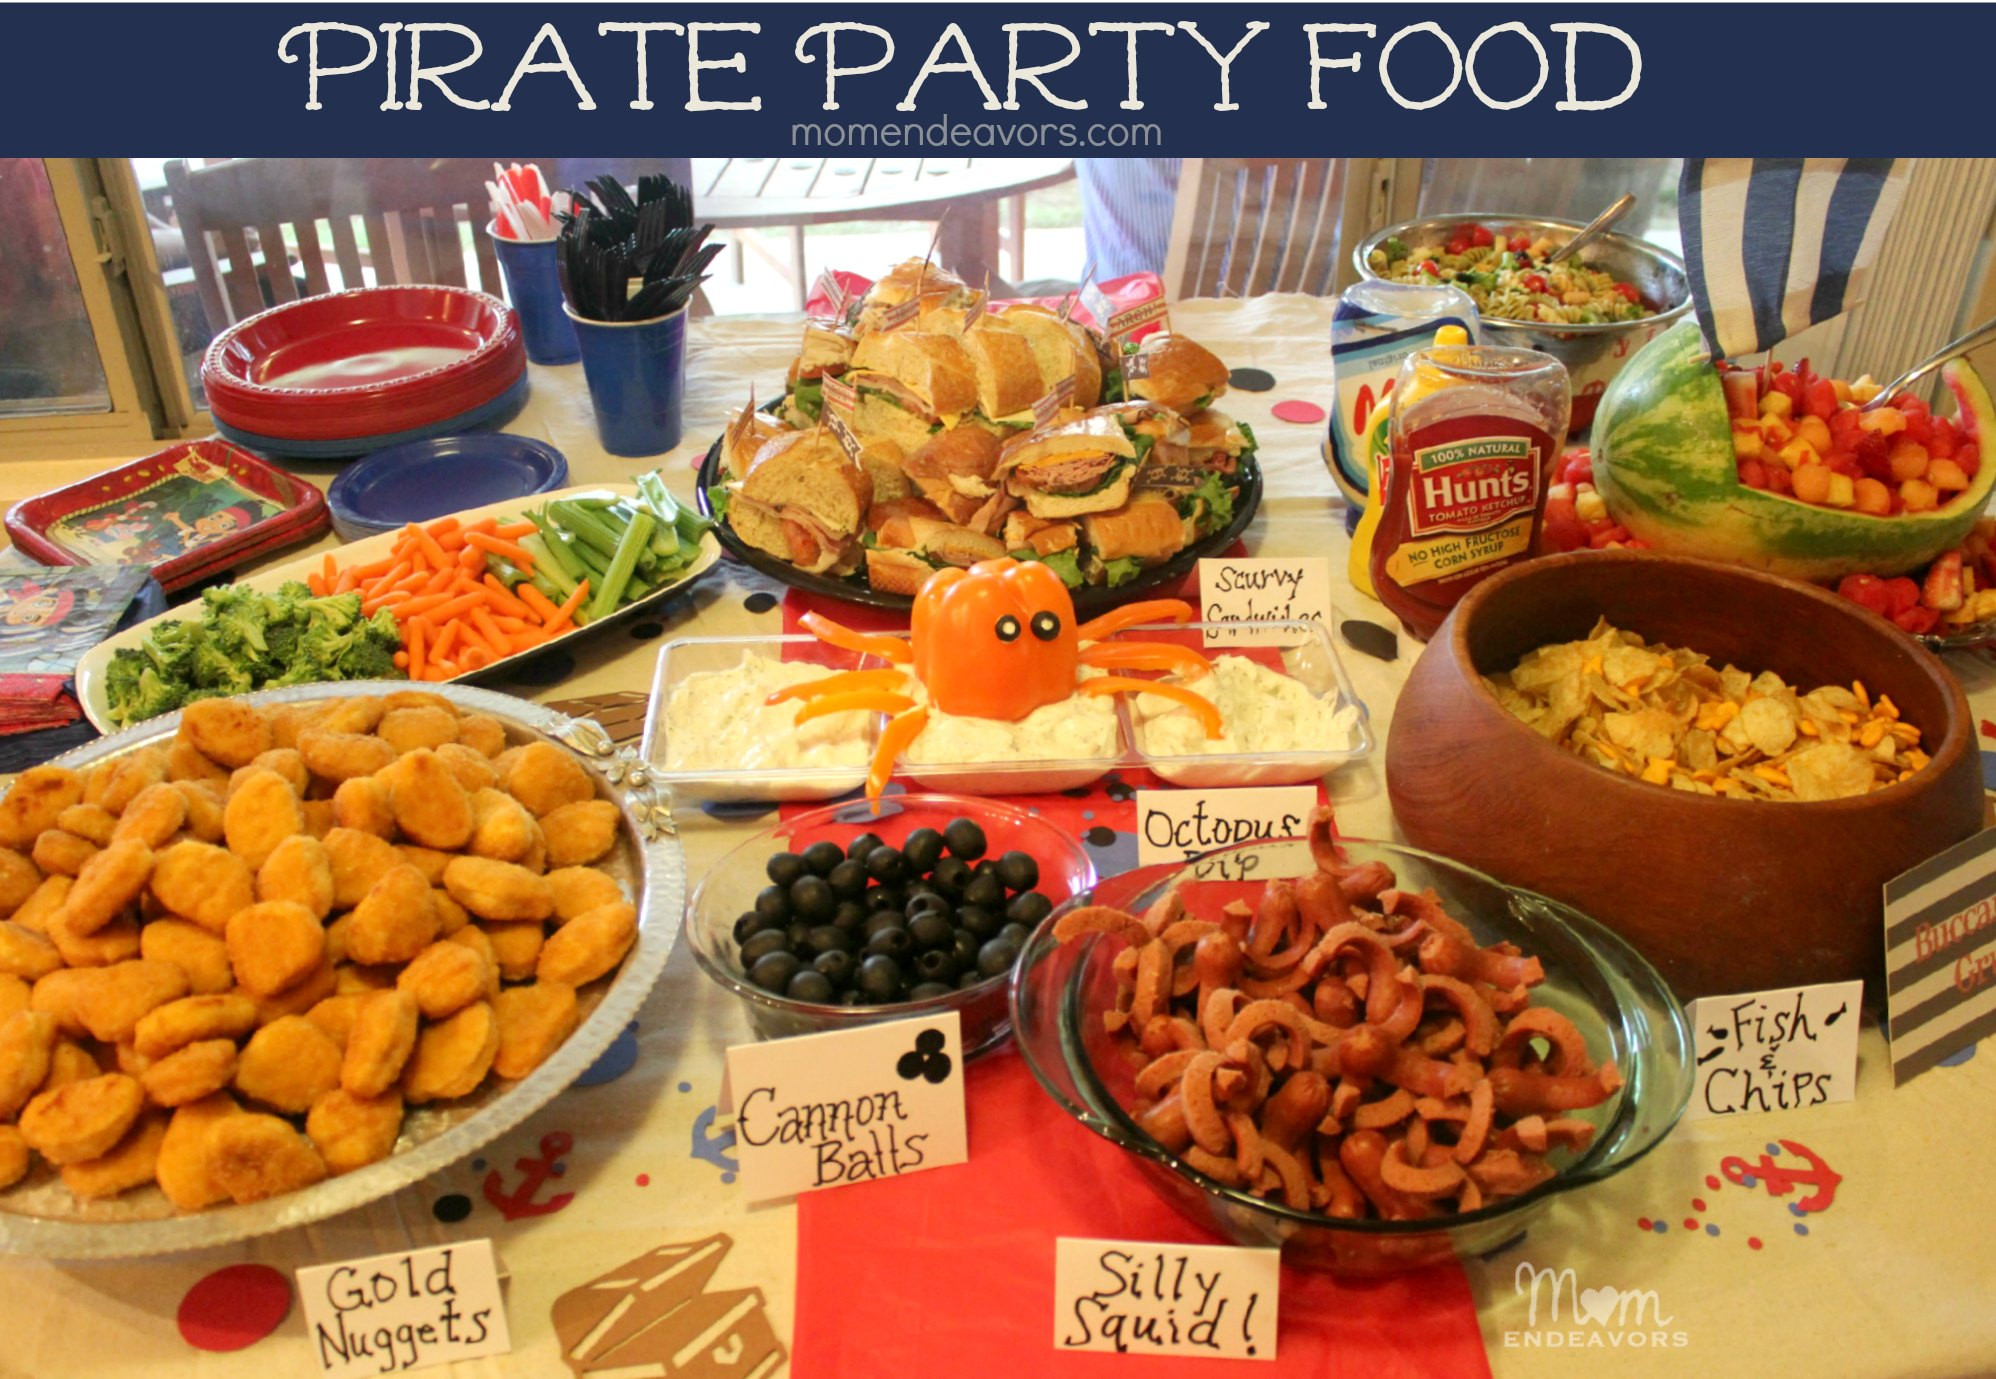 Jake And The Neverland Pirates Party Food Ideas
 Jake and the Never Land Pirates Birthday Party Food